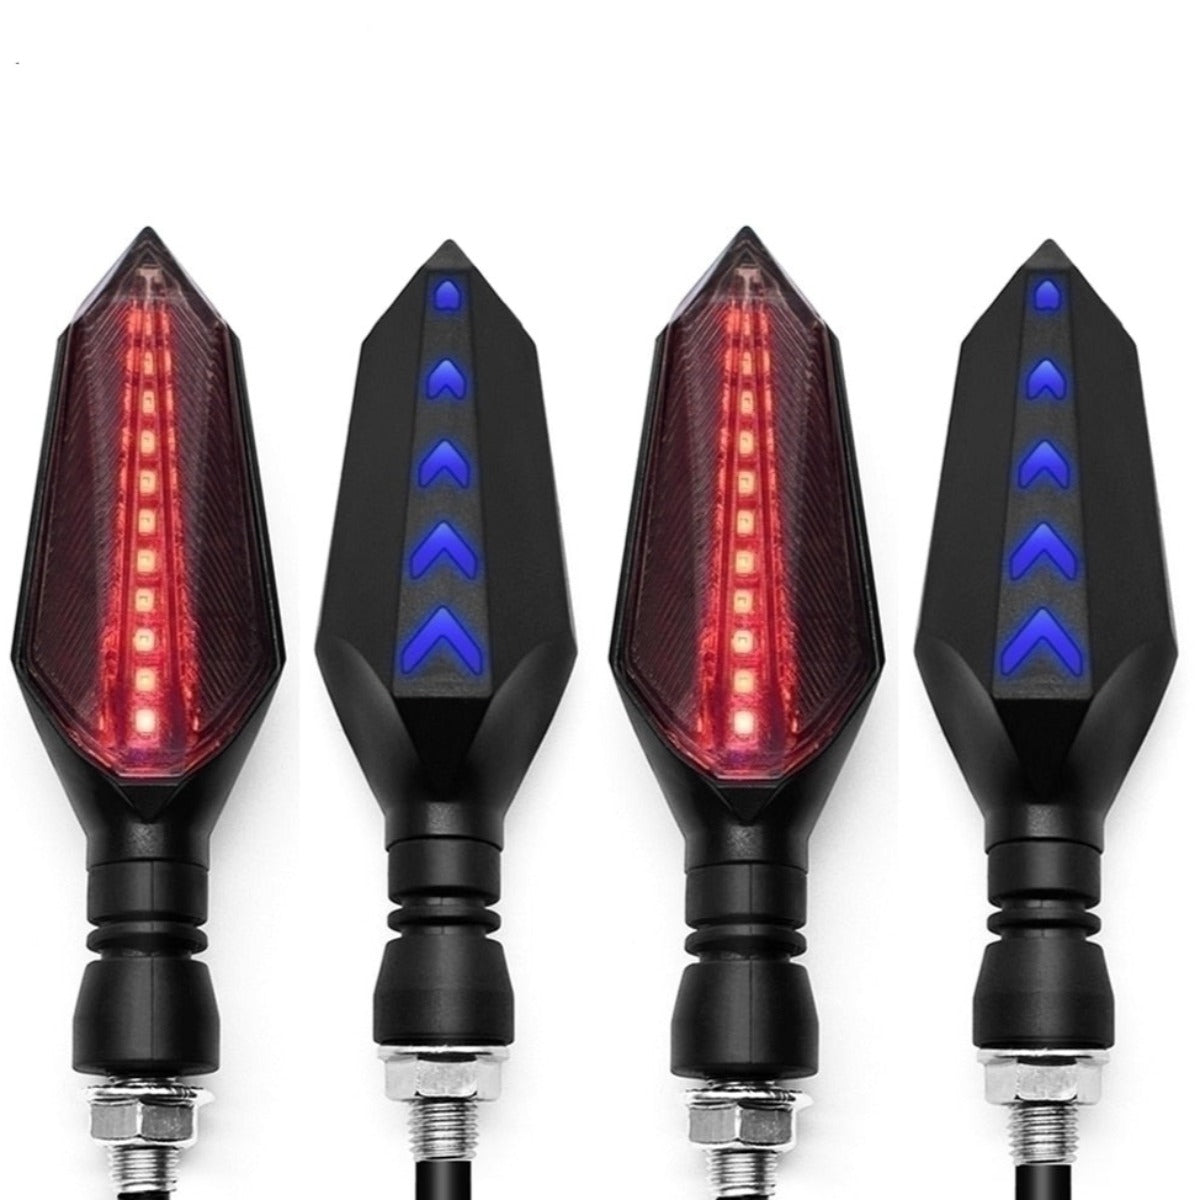 Three Universal Motorcycle LED Turn Signal Sequential Flow lights in red and blue, enhancing safety.